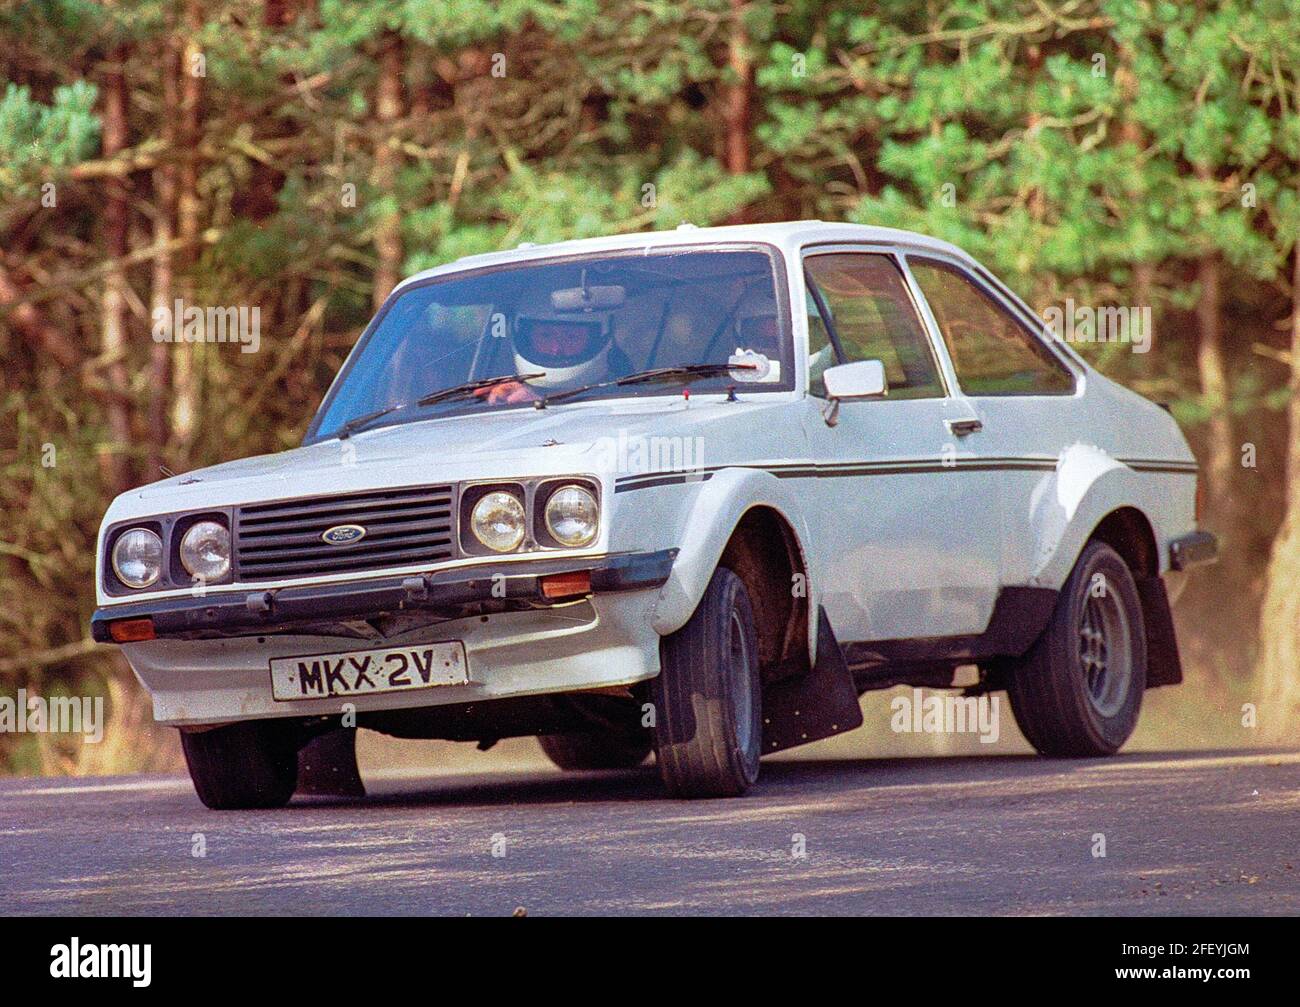 Ford Escort Mk2 on rally stage in Avon Park 1993. Stock Photo